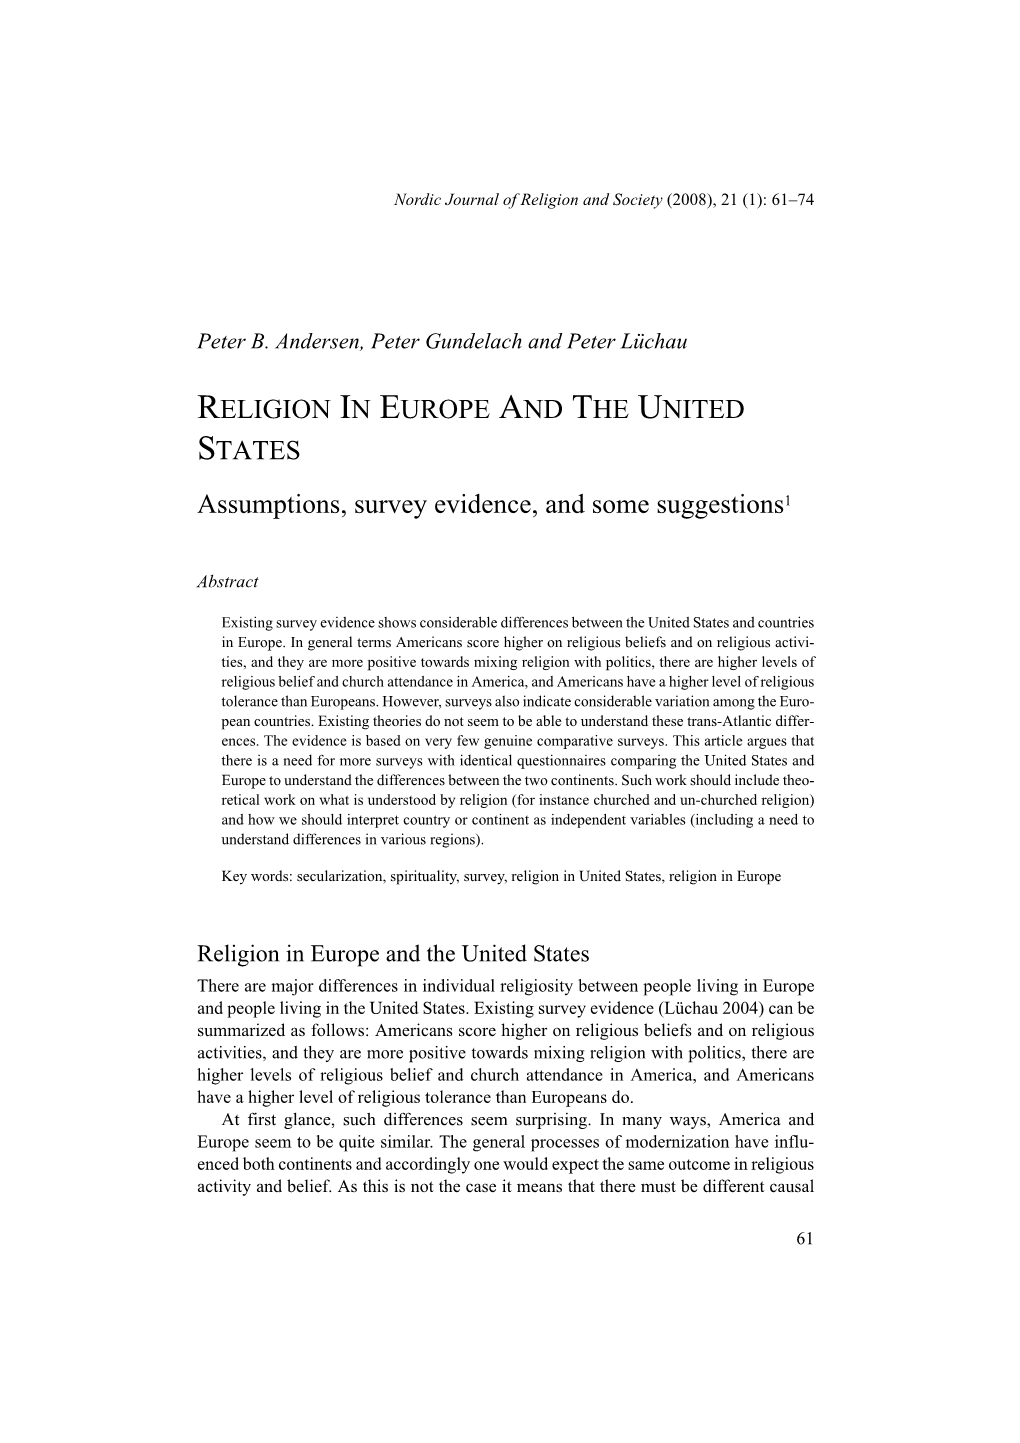 RELIGION in EUROPE and the UNITED STATES Assumptions, Survey Evidence, and Some Suggestions1